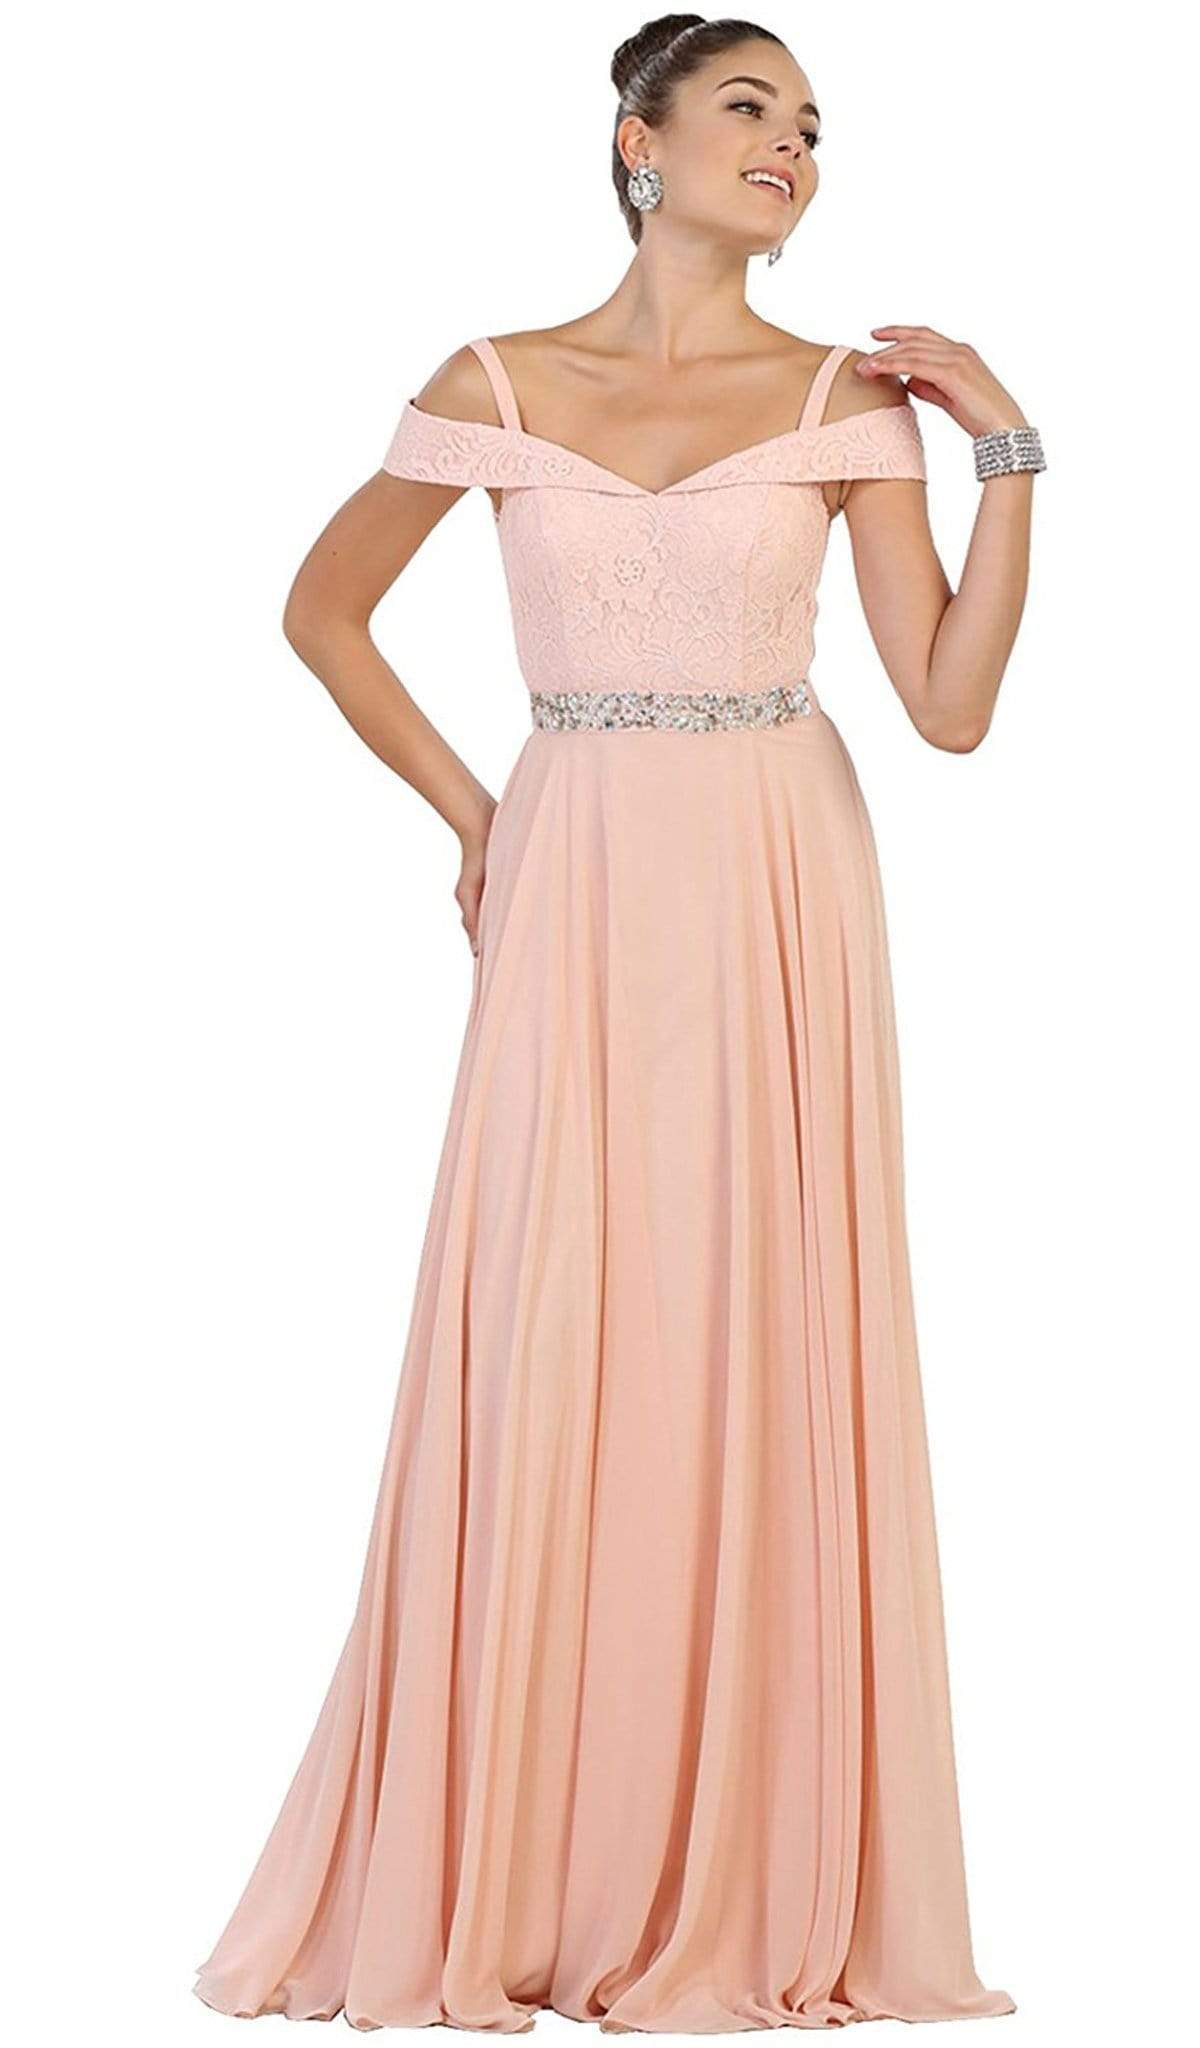 May Queen - MQ1540 Cold Shoulder Lace Prom Dress